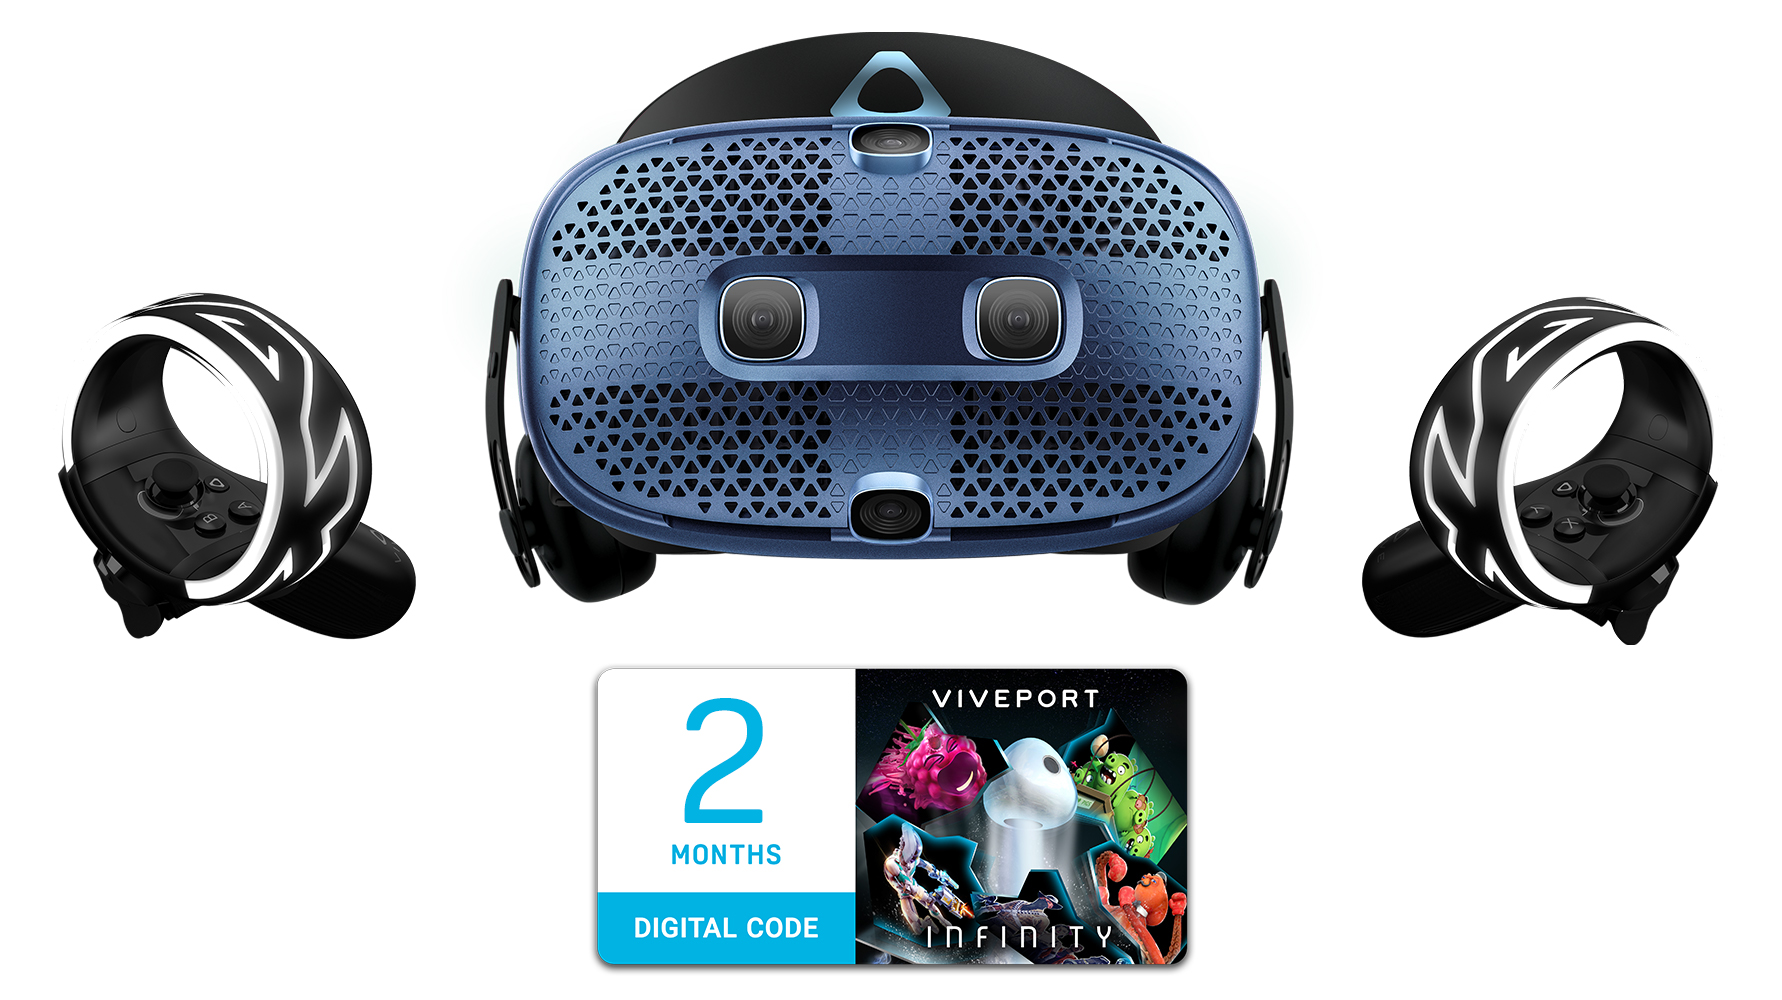 HTC VIVE Cosmos VR Headset & System + 2 Months VIVEPORT Infinity Subscription - image 1 of 7